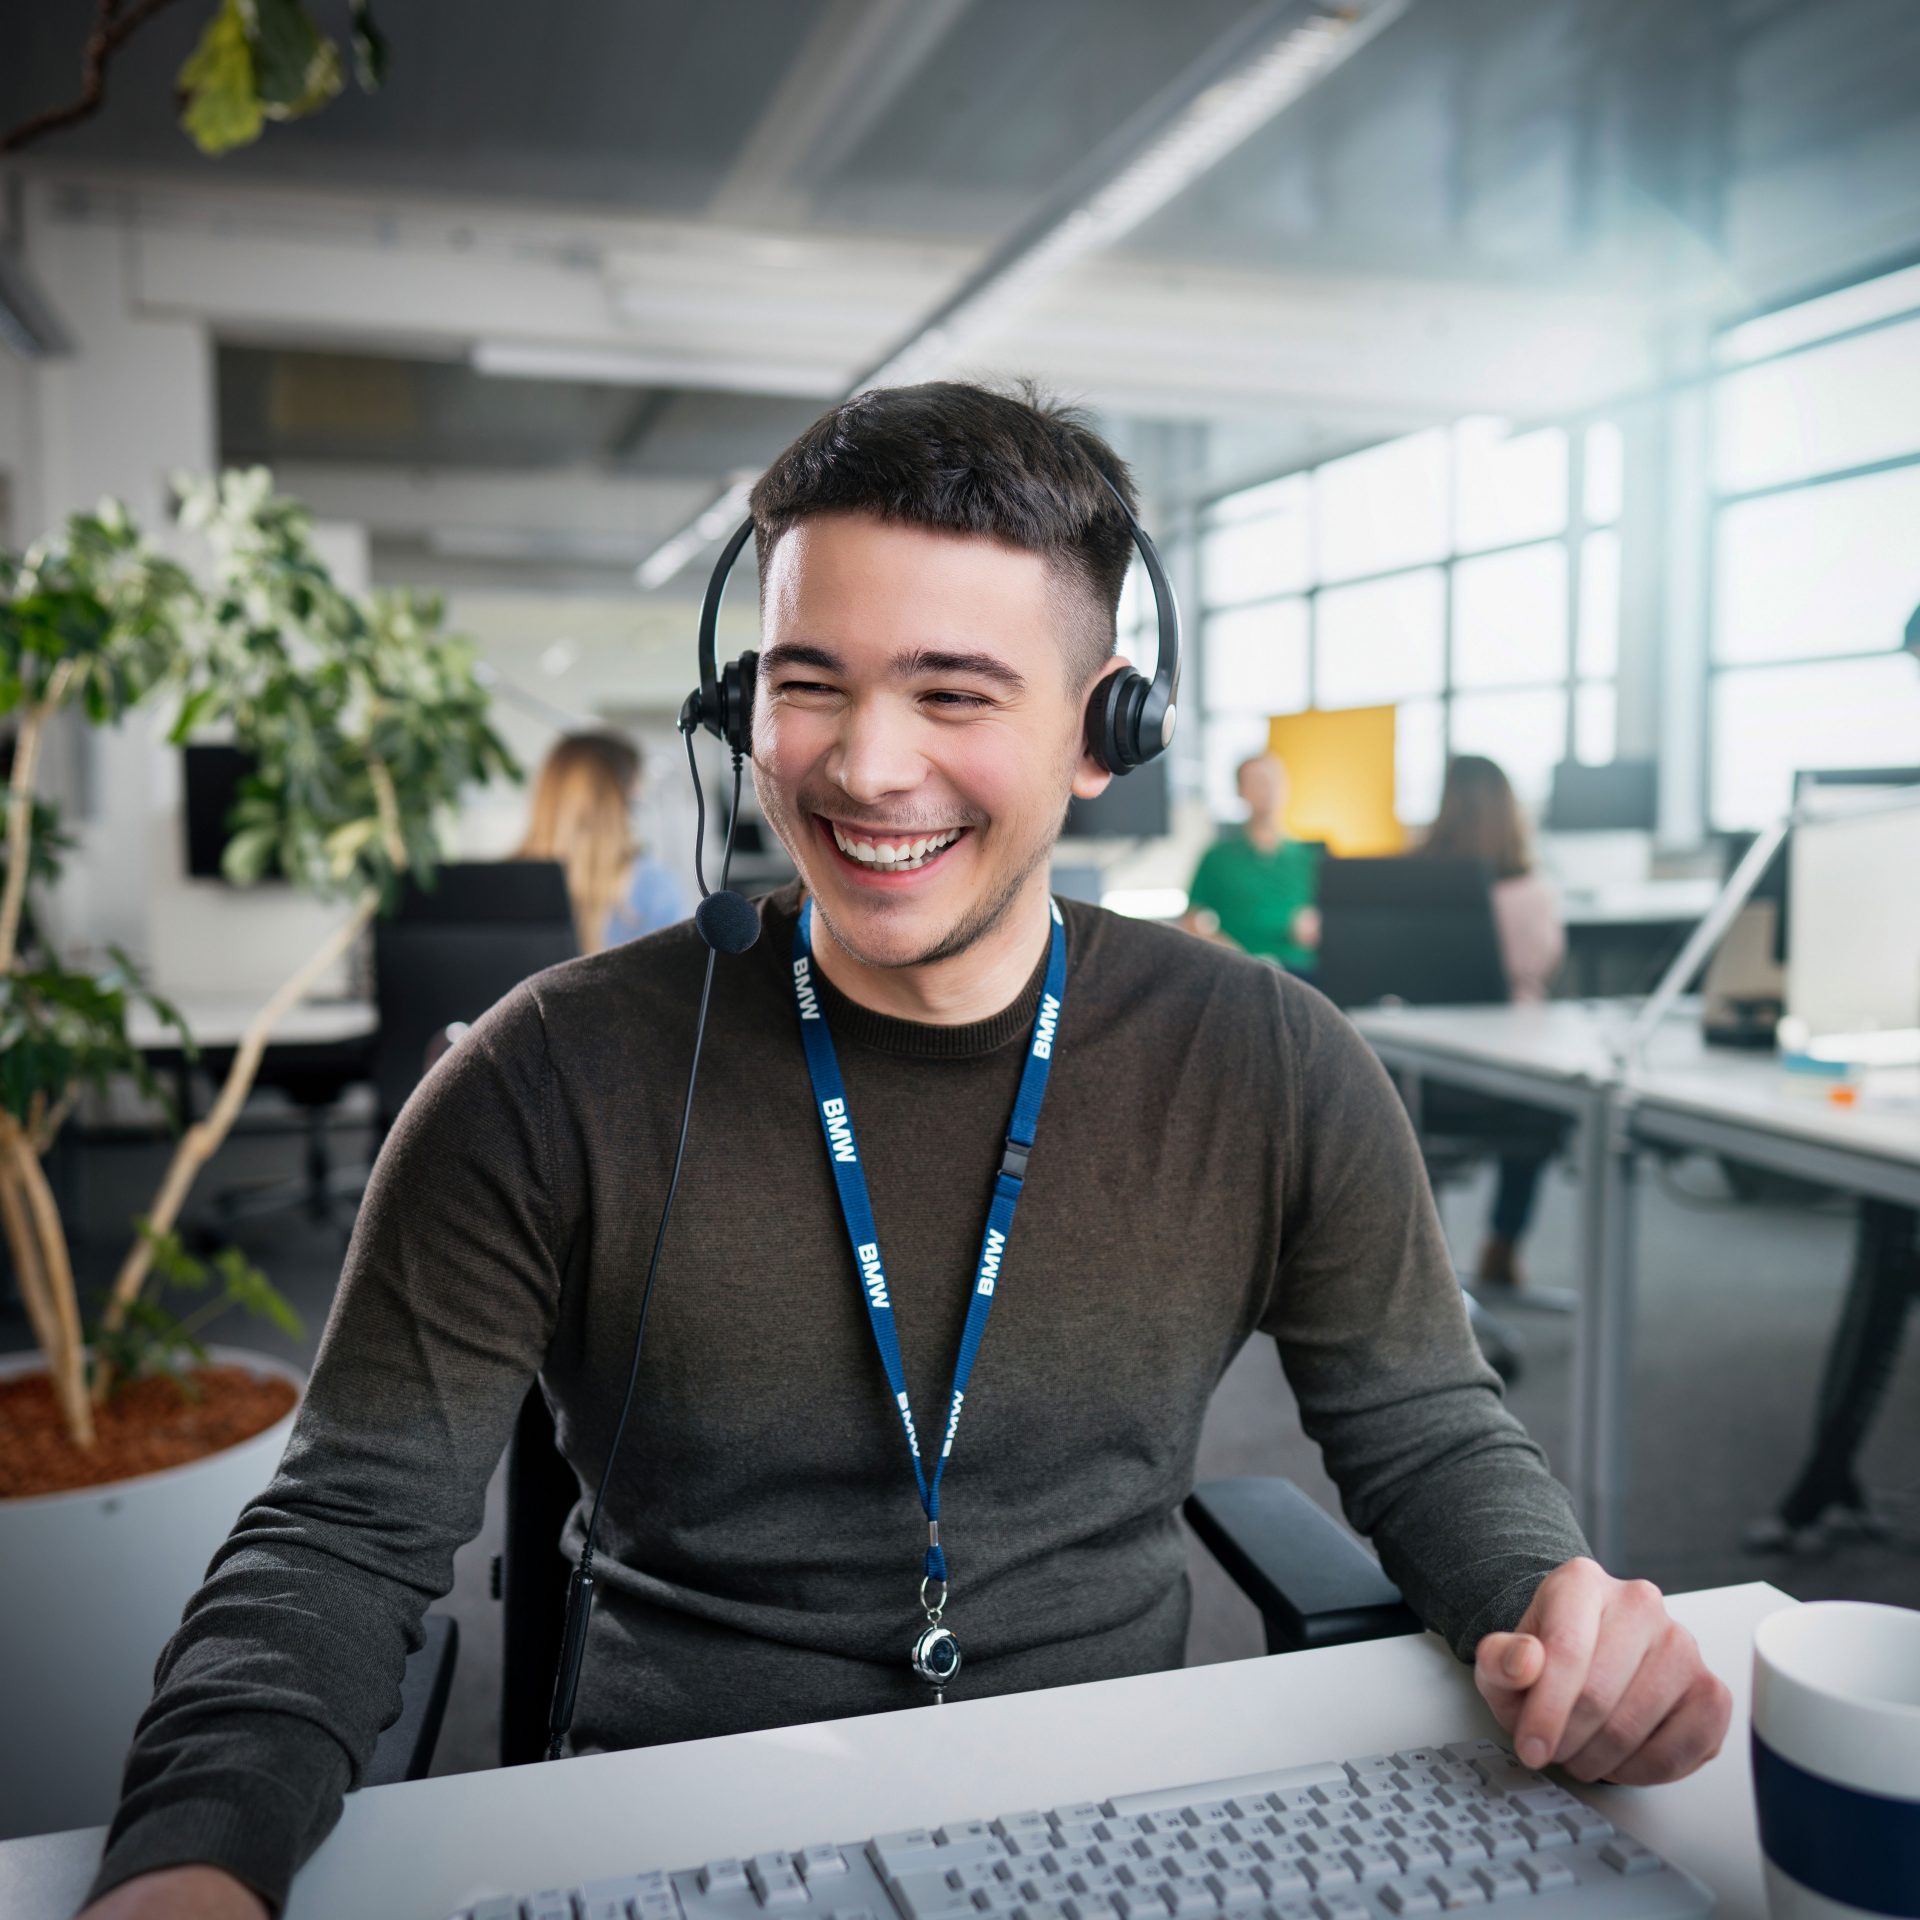 The picture shows a young man, working in customer services, sitting in an office, wearing a headset.